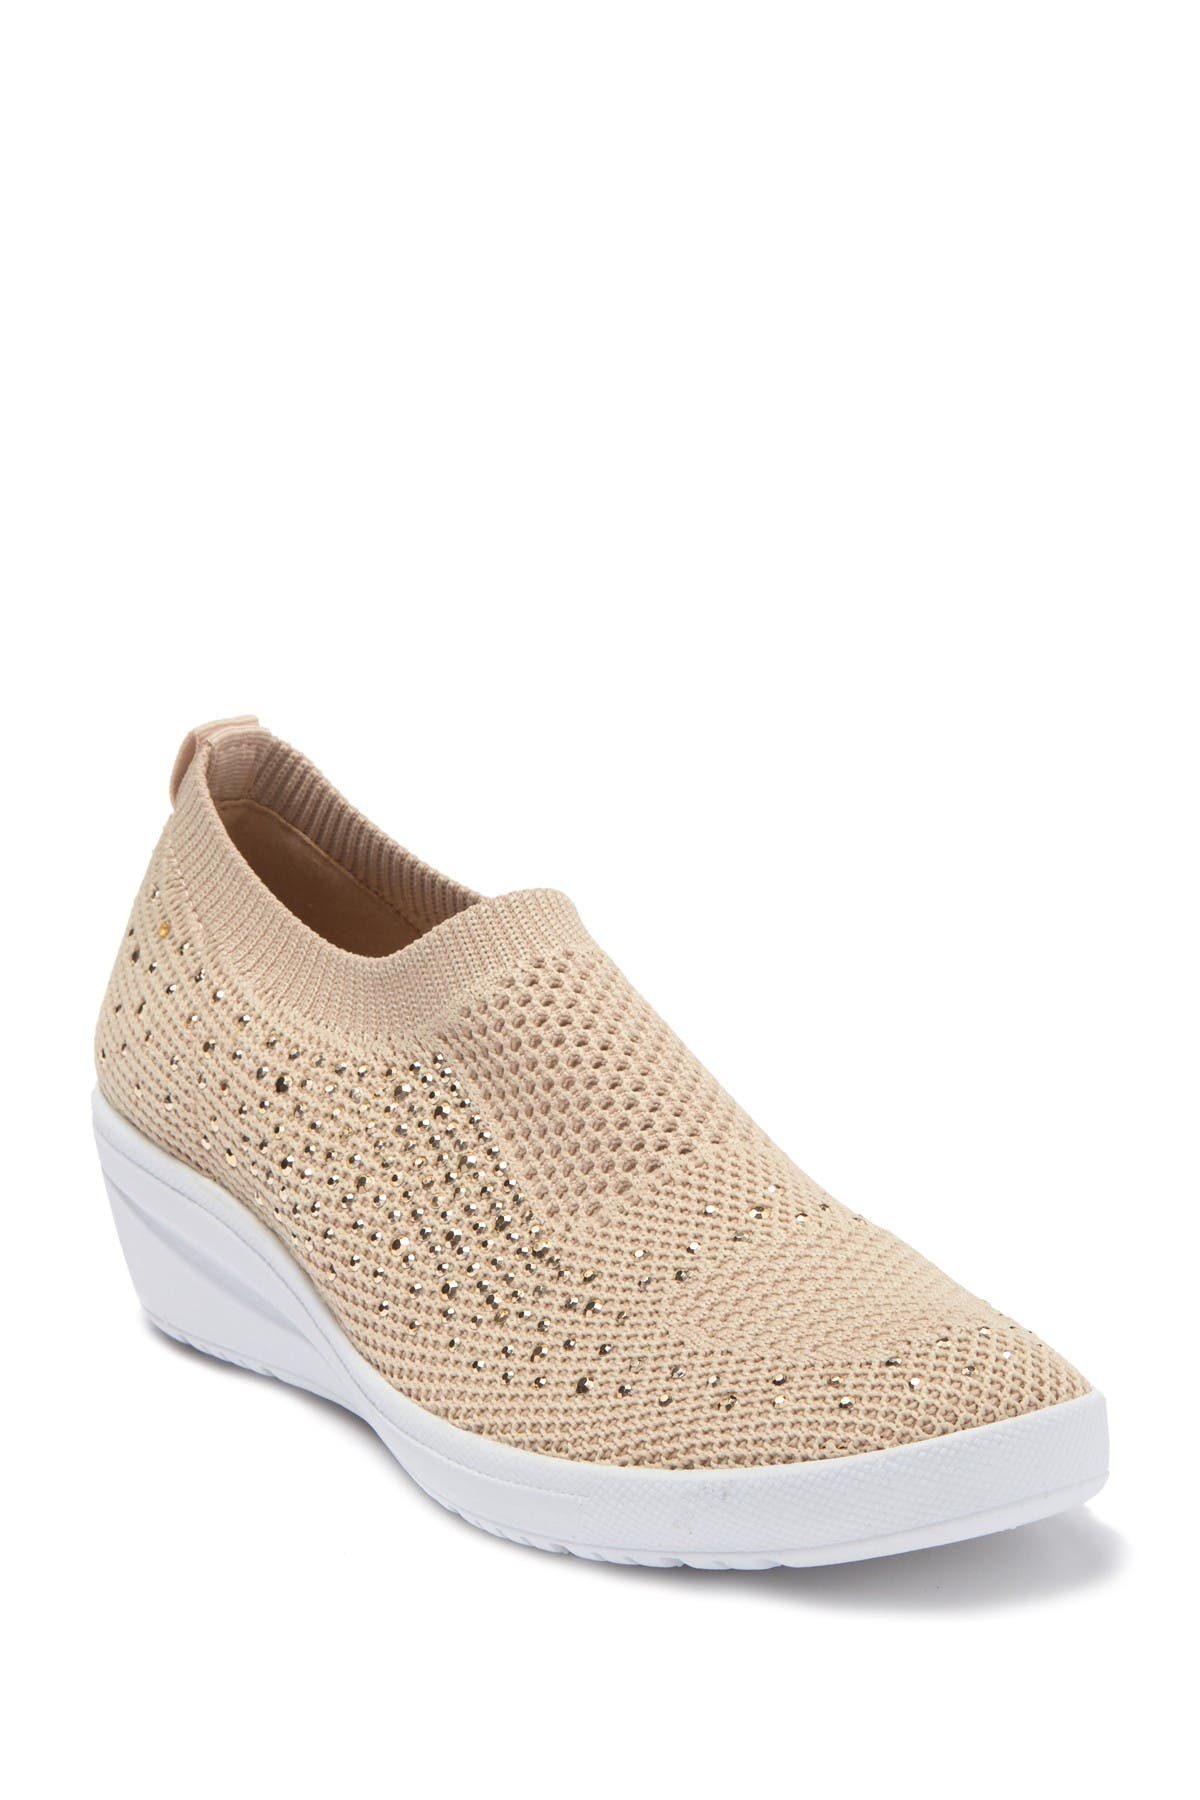 Anne Klein | Yearly Perforated Wedge 